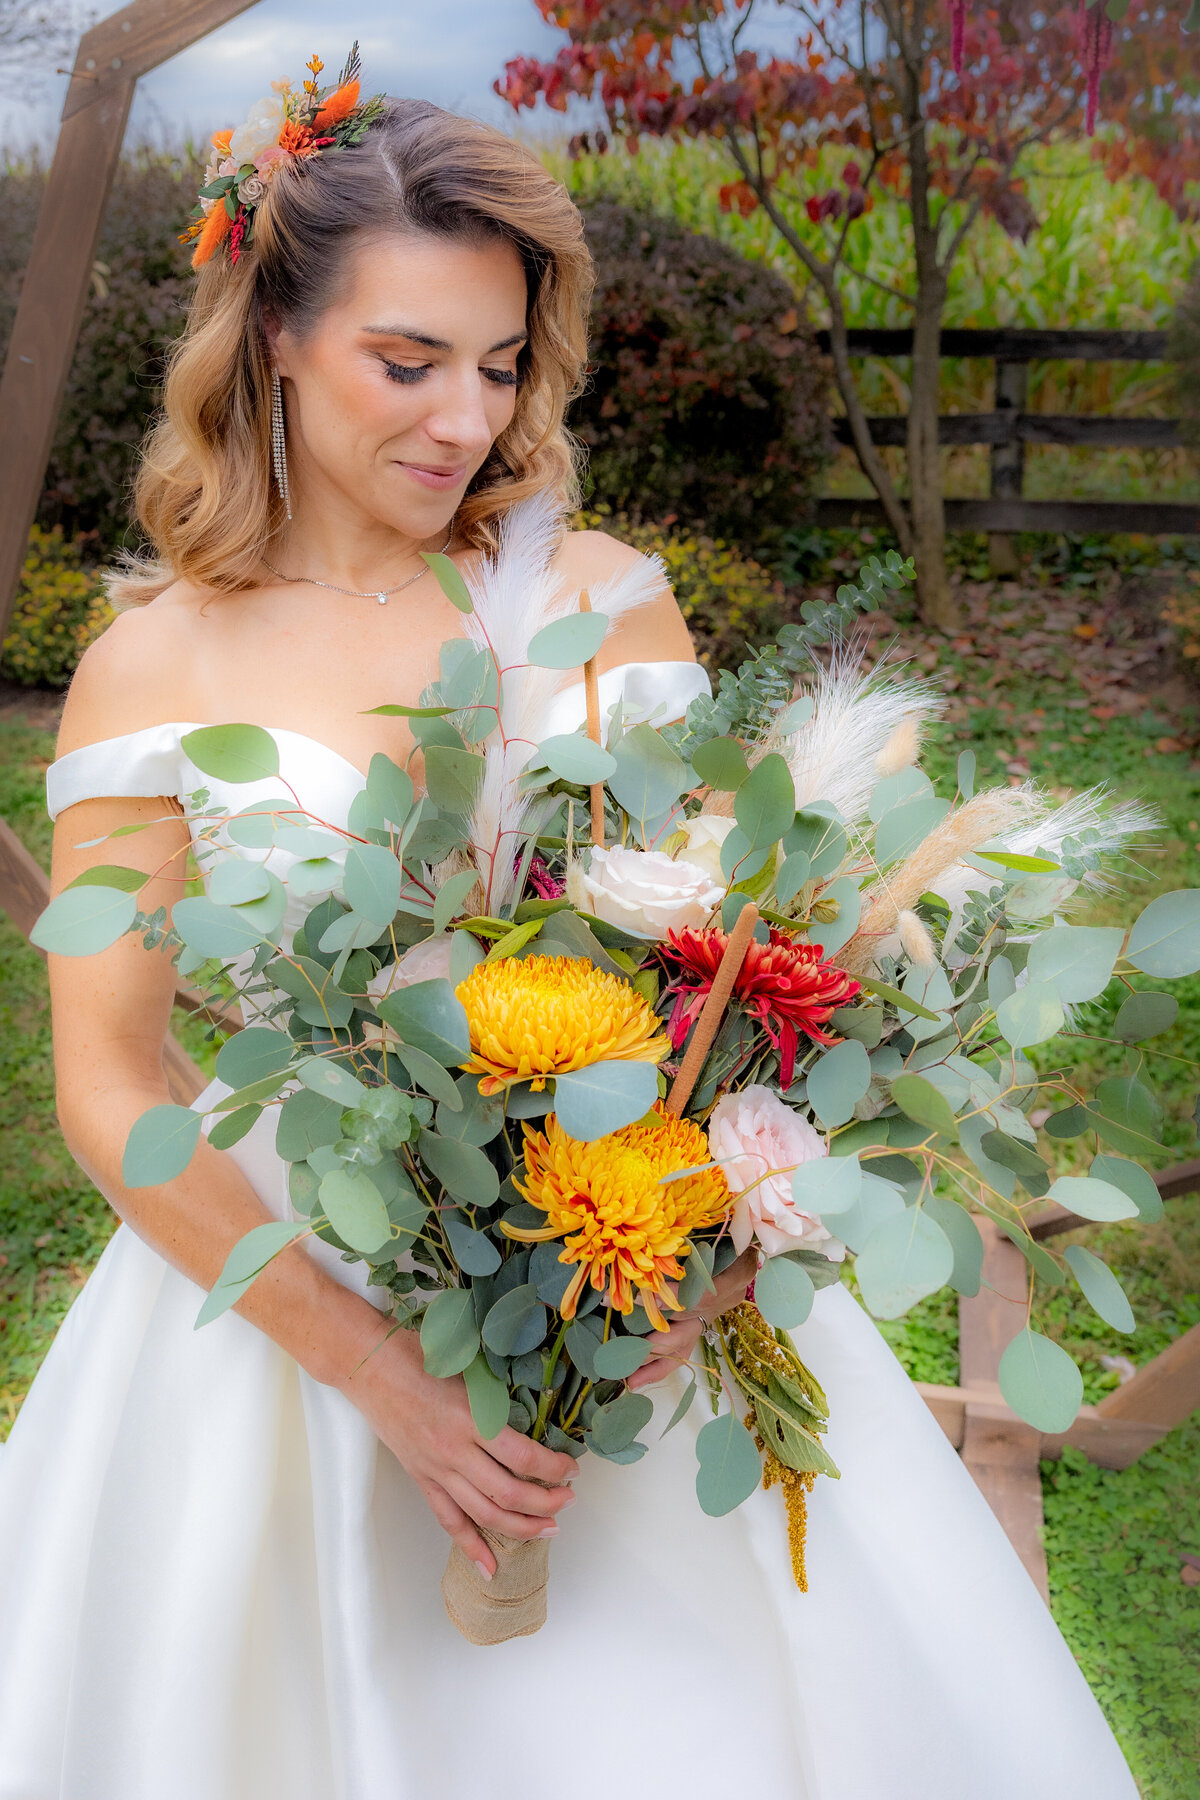 A bride wearing a white dress with autumn flowers in her hair while holding a bouquet of fall blooms